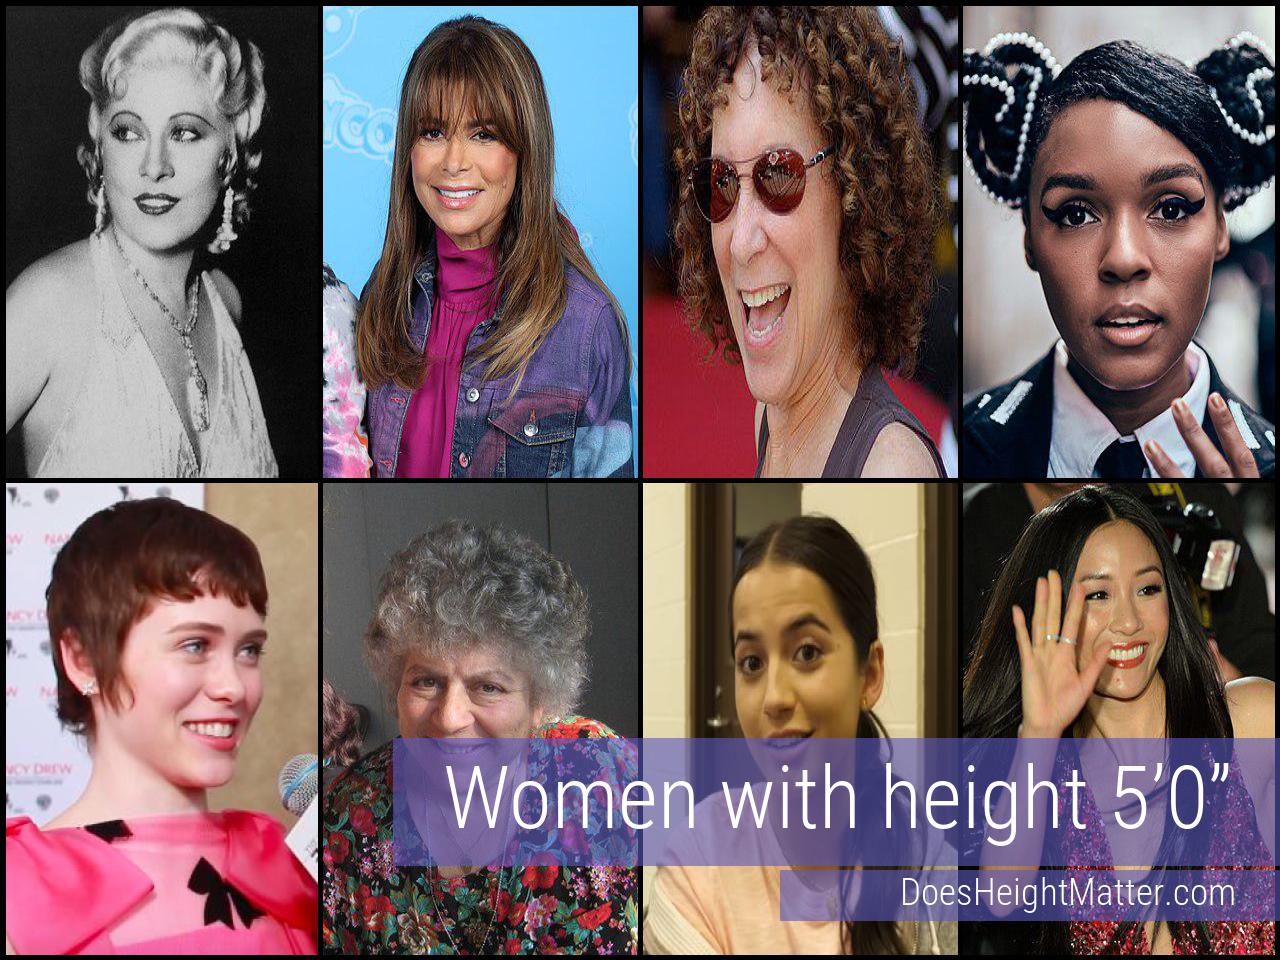 Female celebrities who are 5'0